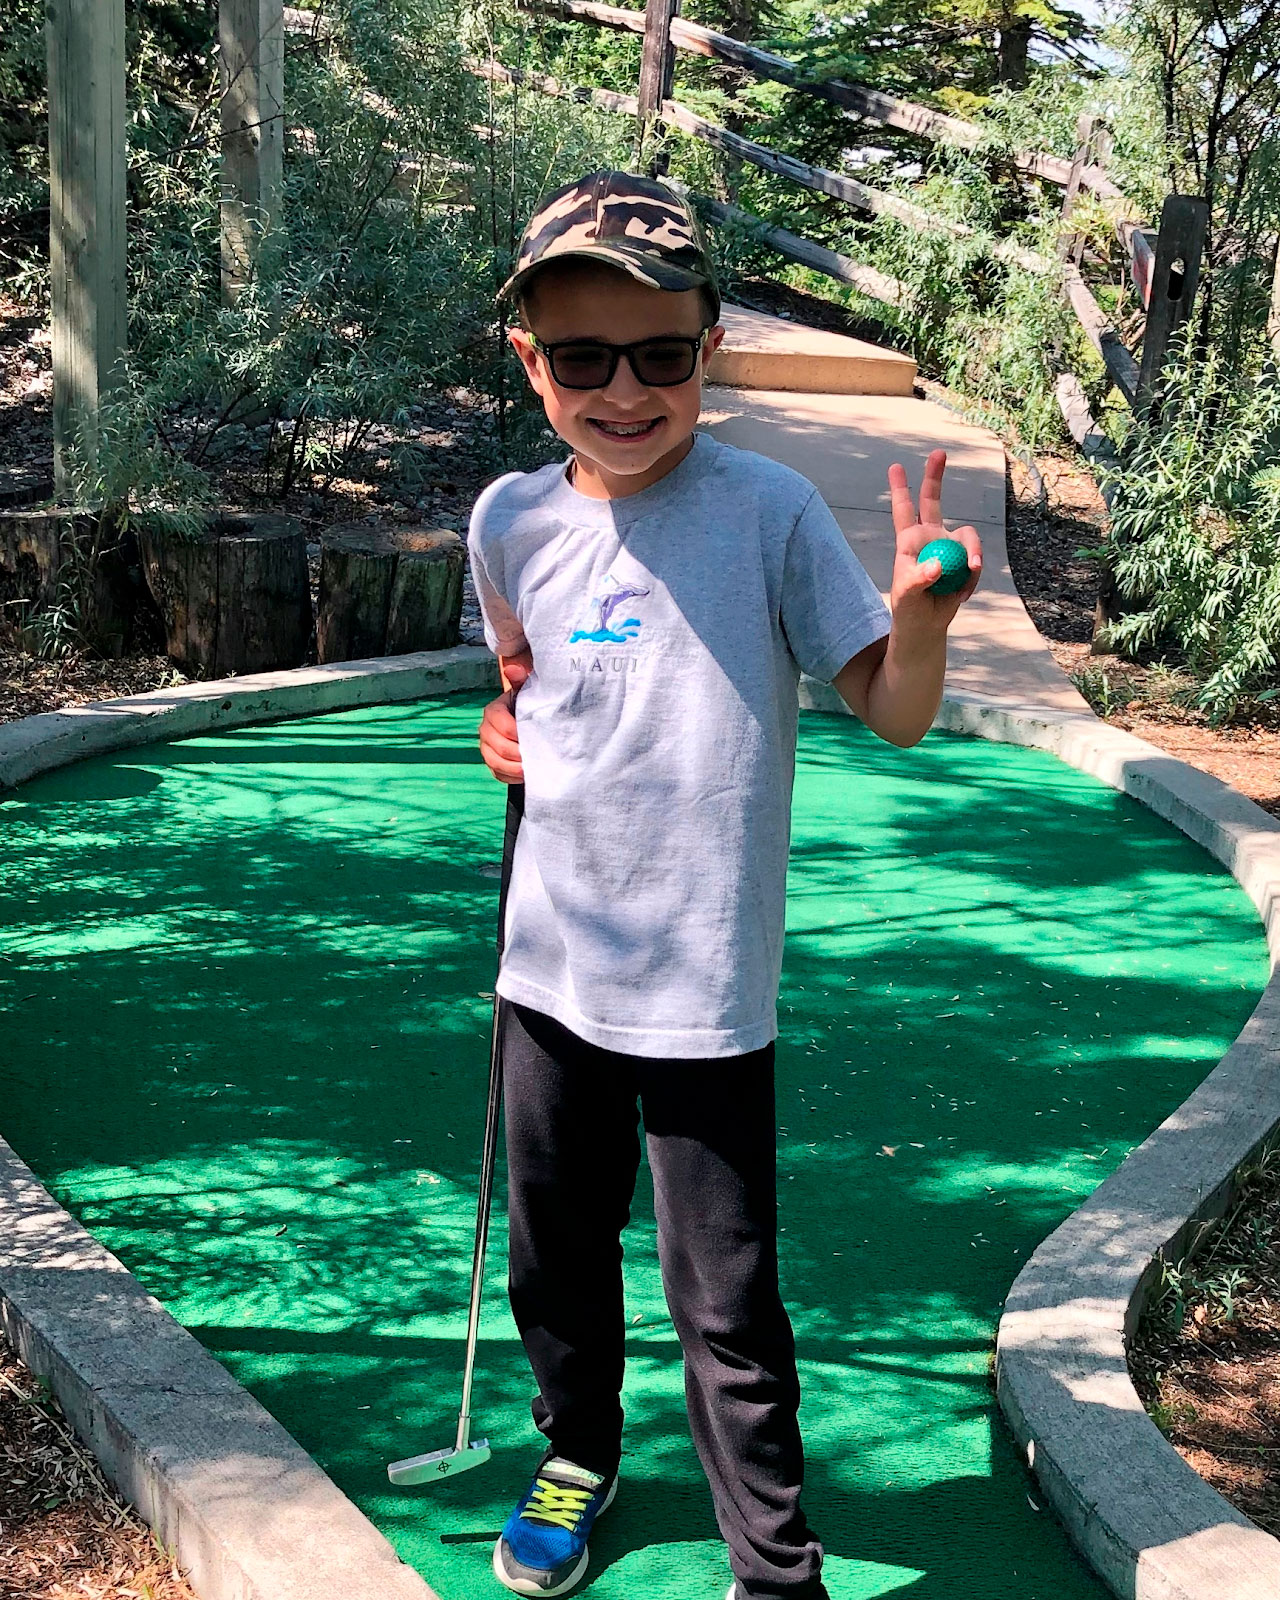 Jordan is standing on a mini golf course looking into the camera and smiling.  He is holding 2 fingers up as a peace sign with his right hand.